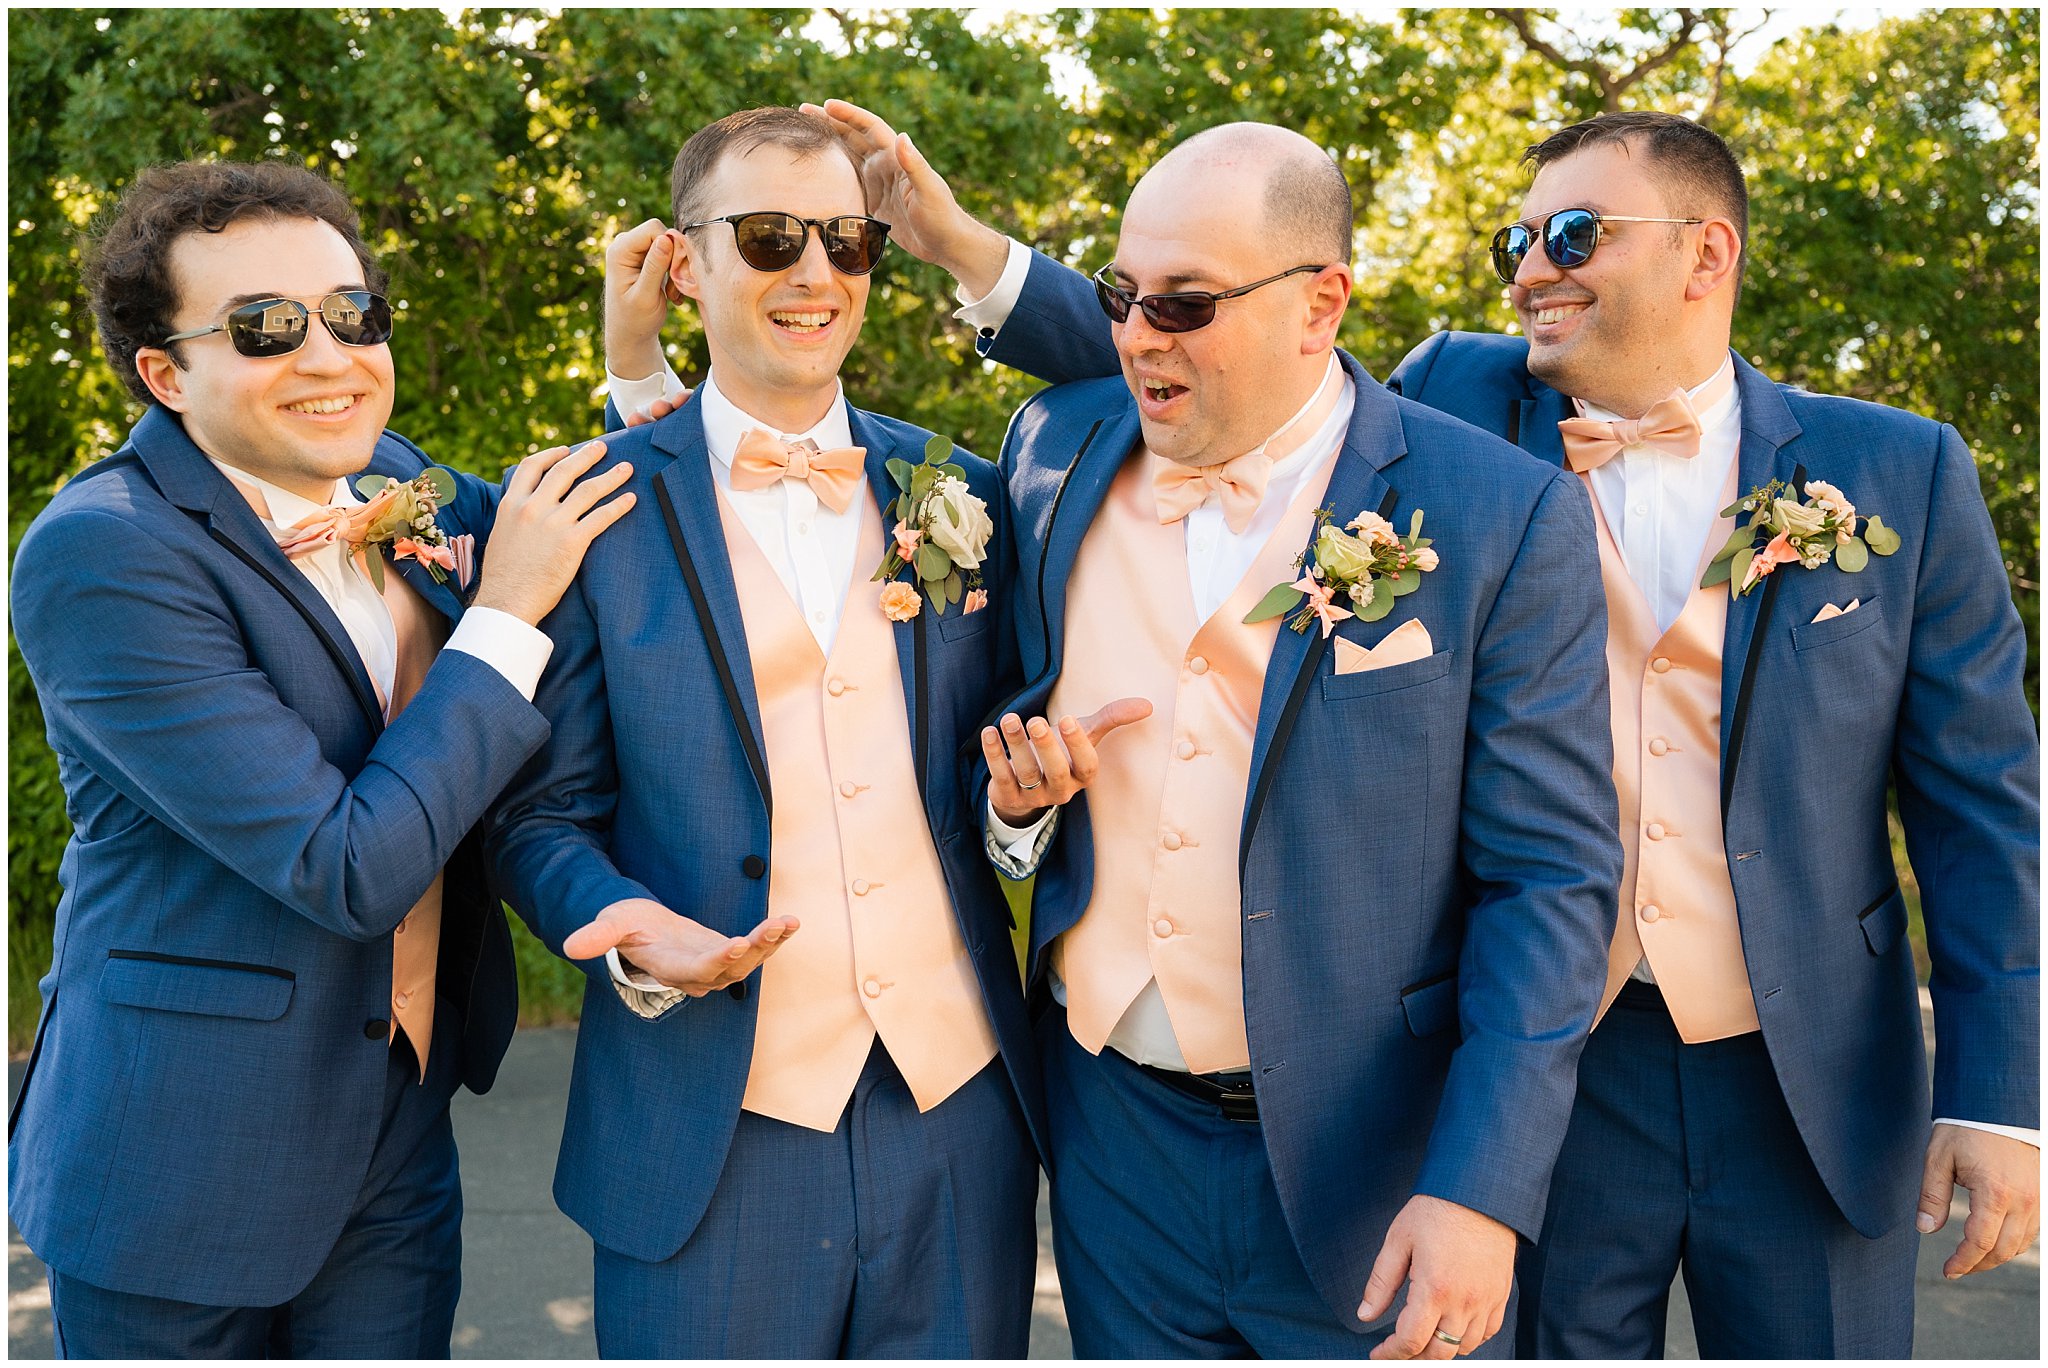 Wedding party of bridesmaids and groomsmen in blue, coral, and pink | Oak Hills Utah Destination Wedding | Jessie and Dallin Photography